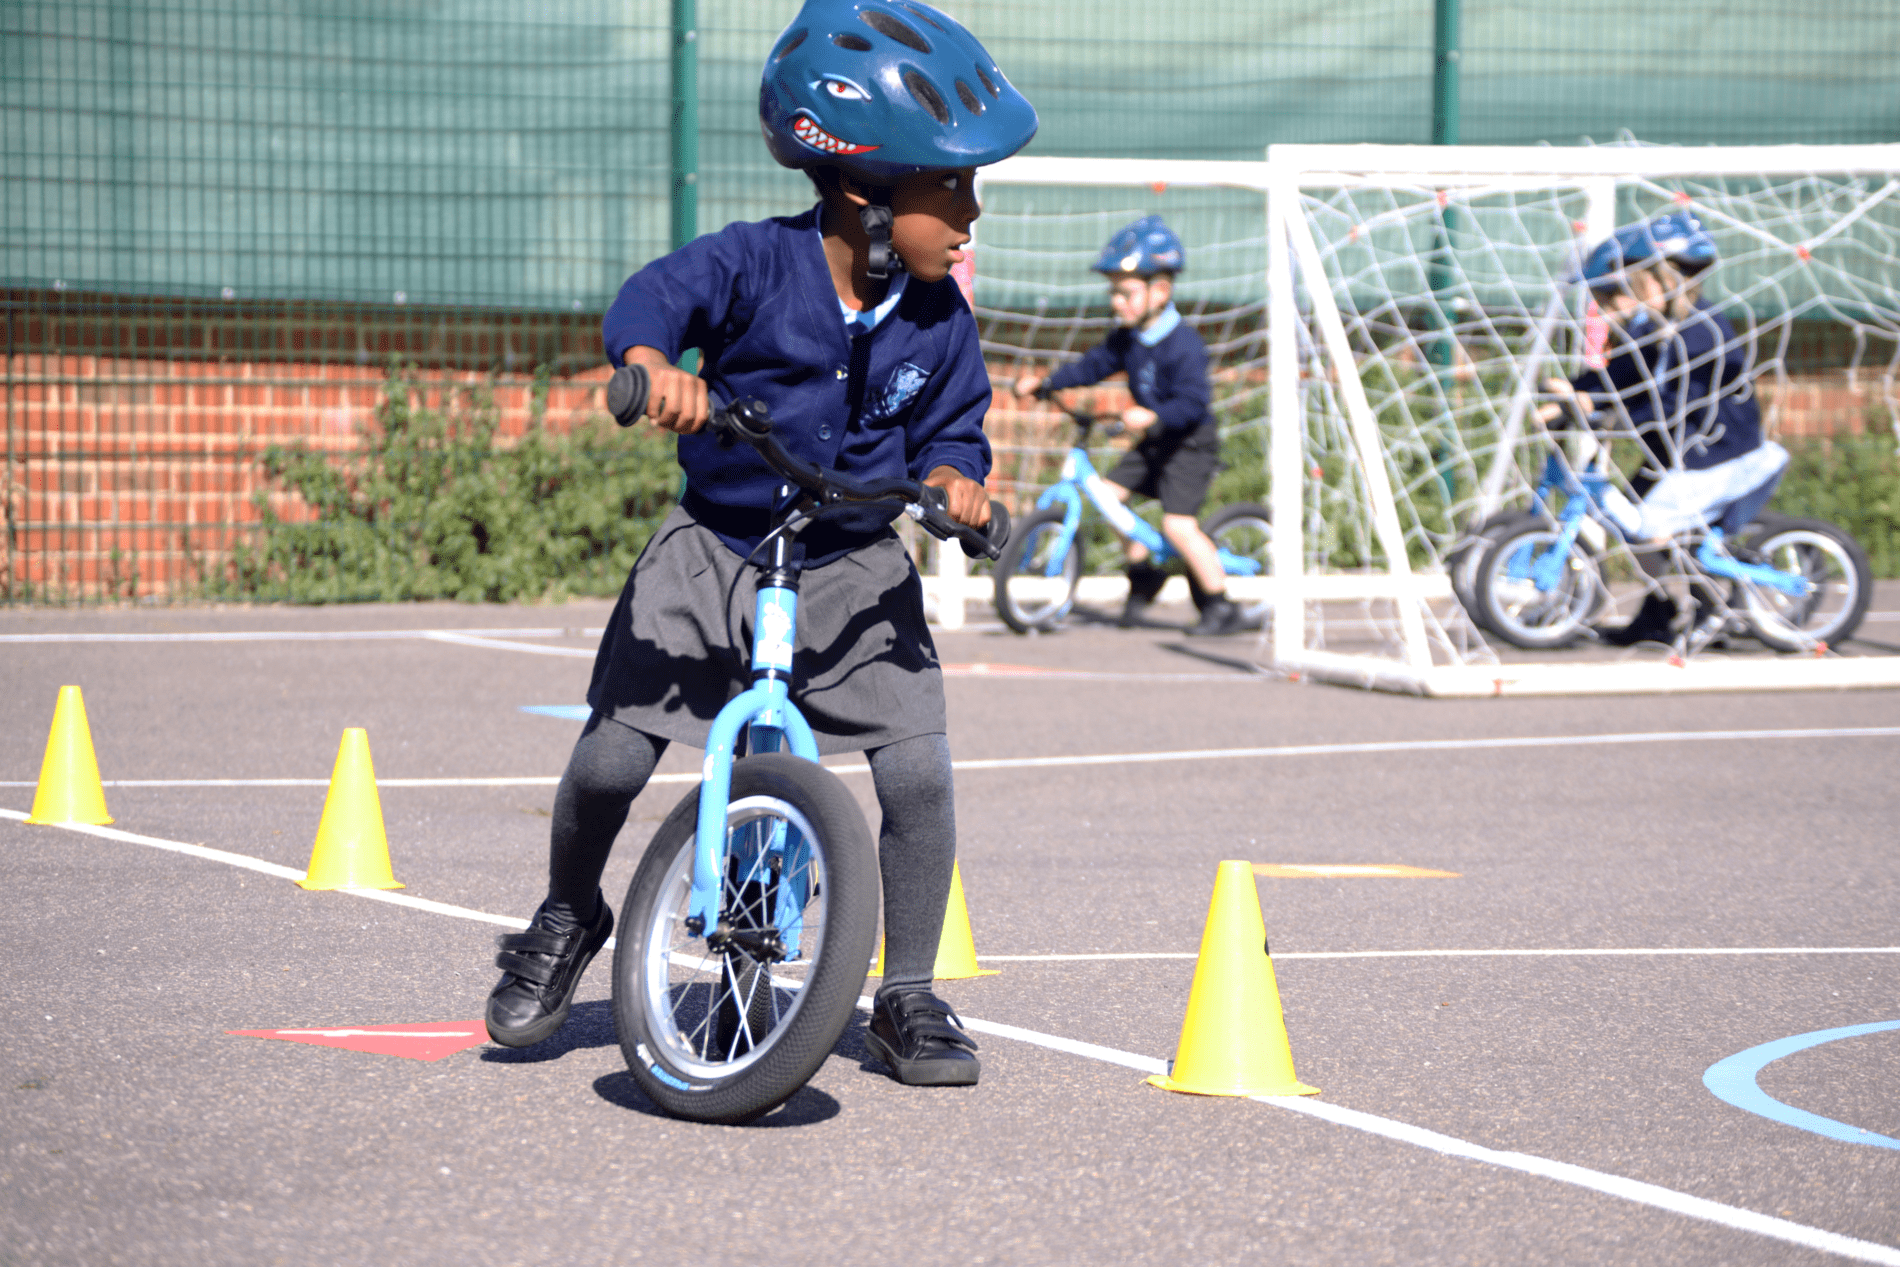 riding bikes in PE lesson at rosherville academy EYFS